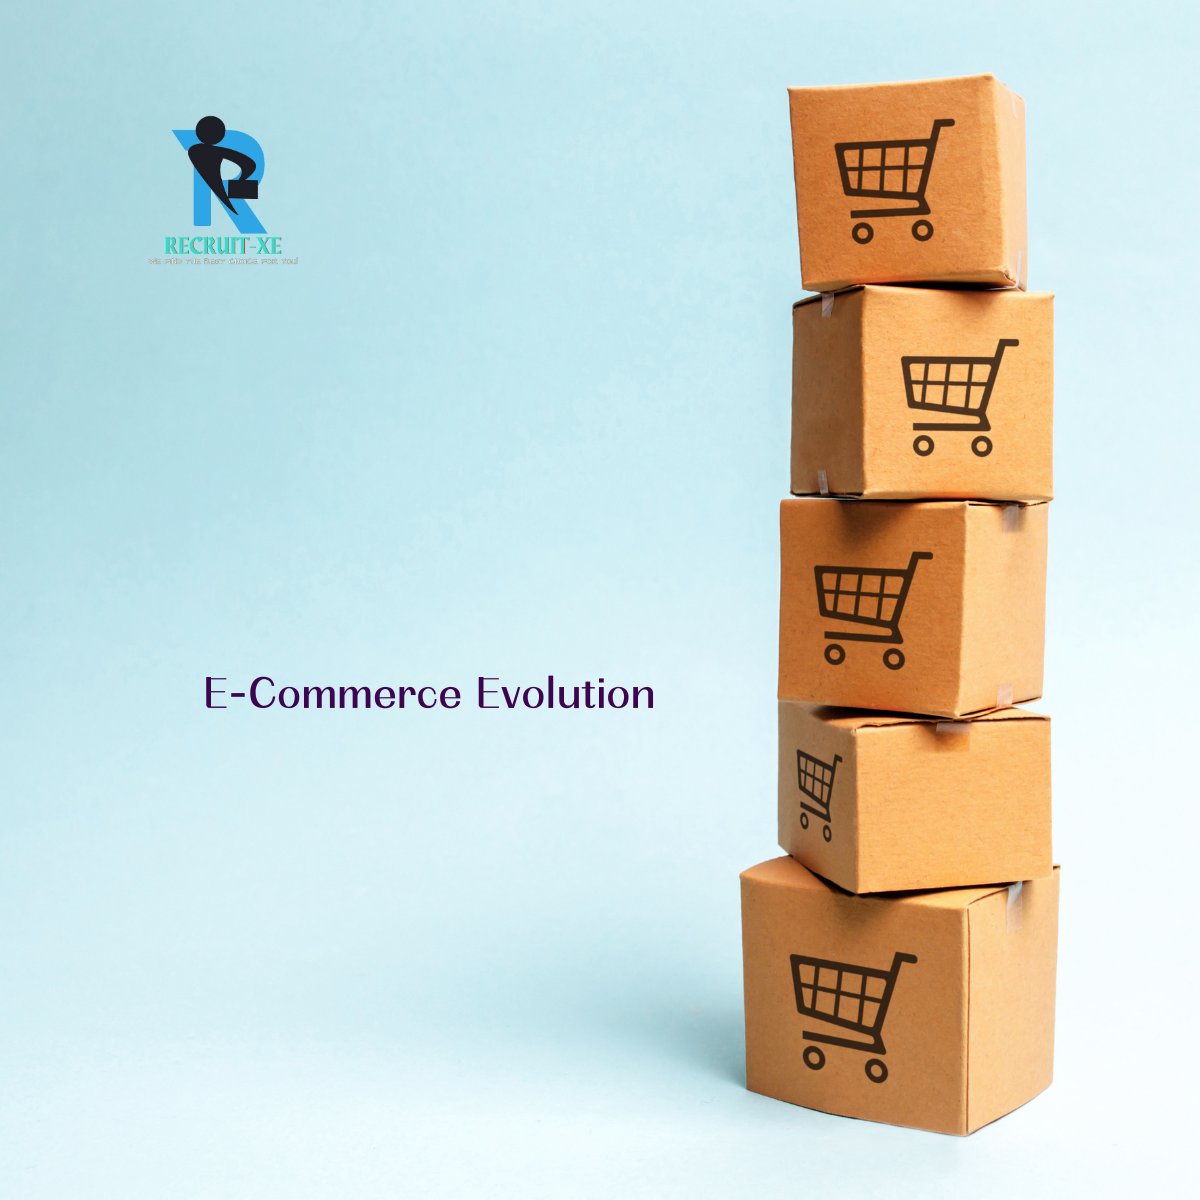 The pandemic acted as a turbo boost for e-commerce, catapulting its growth to new heights.
#ECommerceEvolution #SeamlessOnlineExperiences #LastMileDelivery #SustainablePackaging #DigitalTransformation